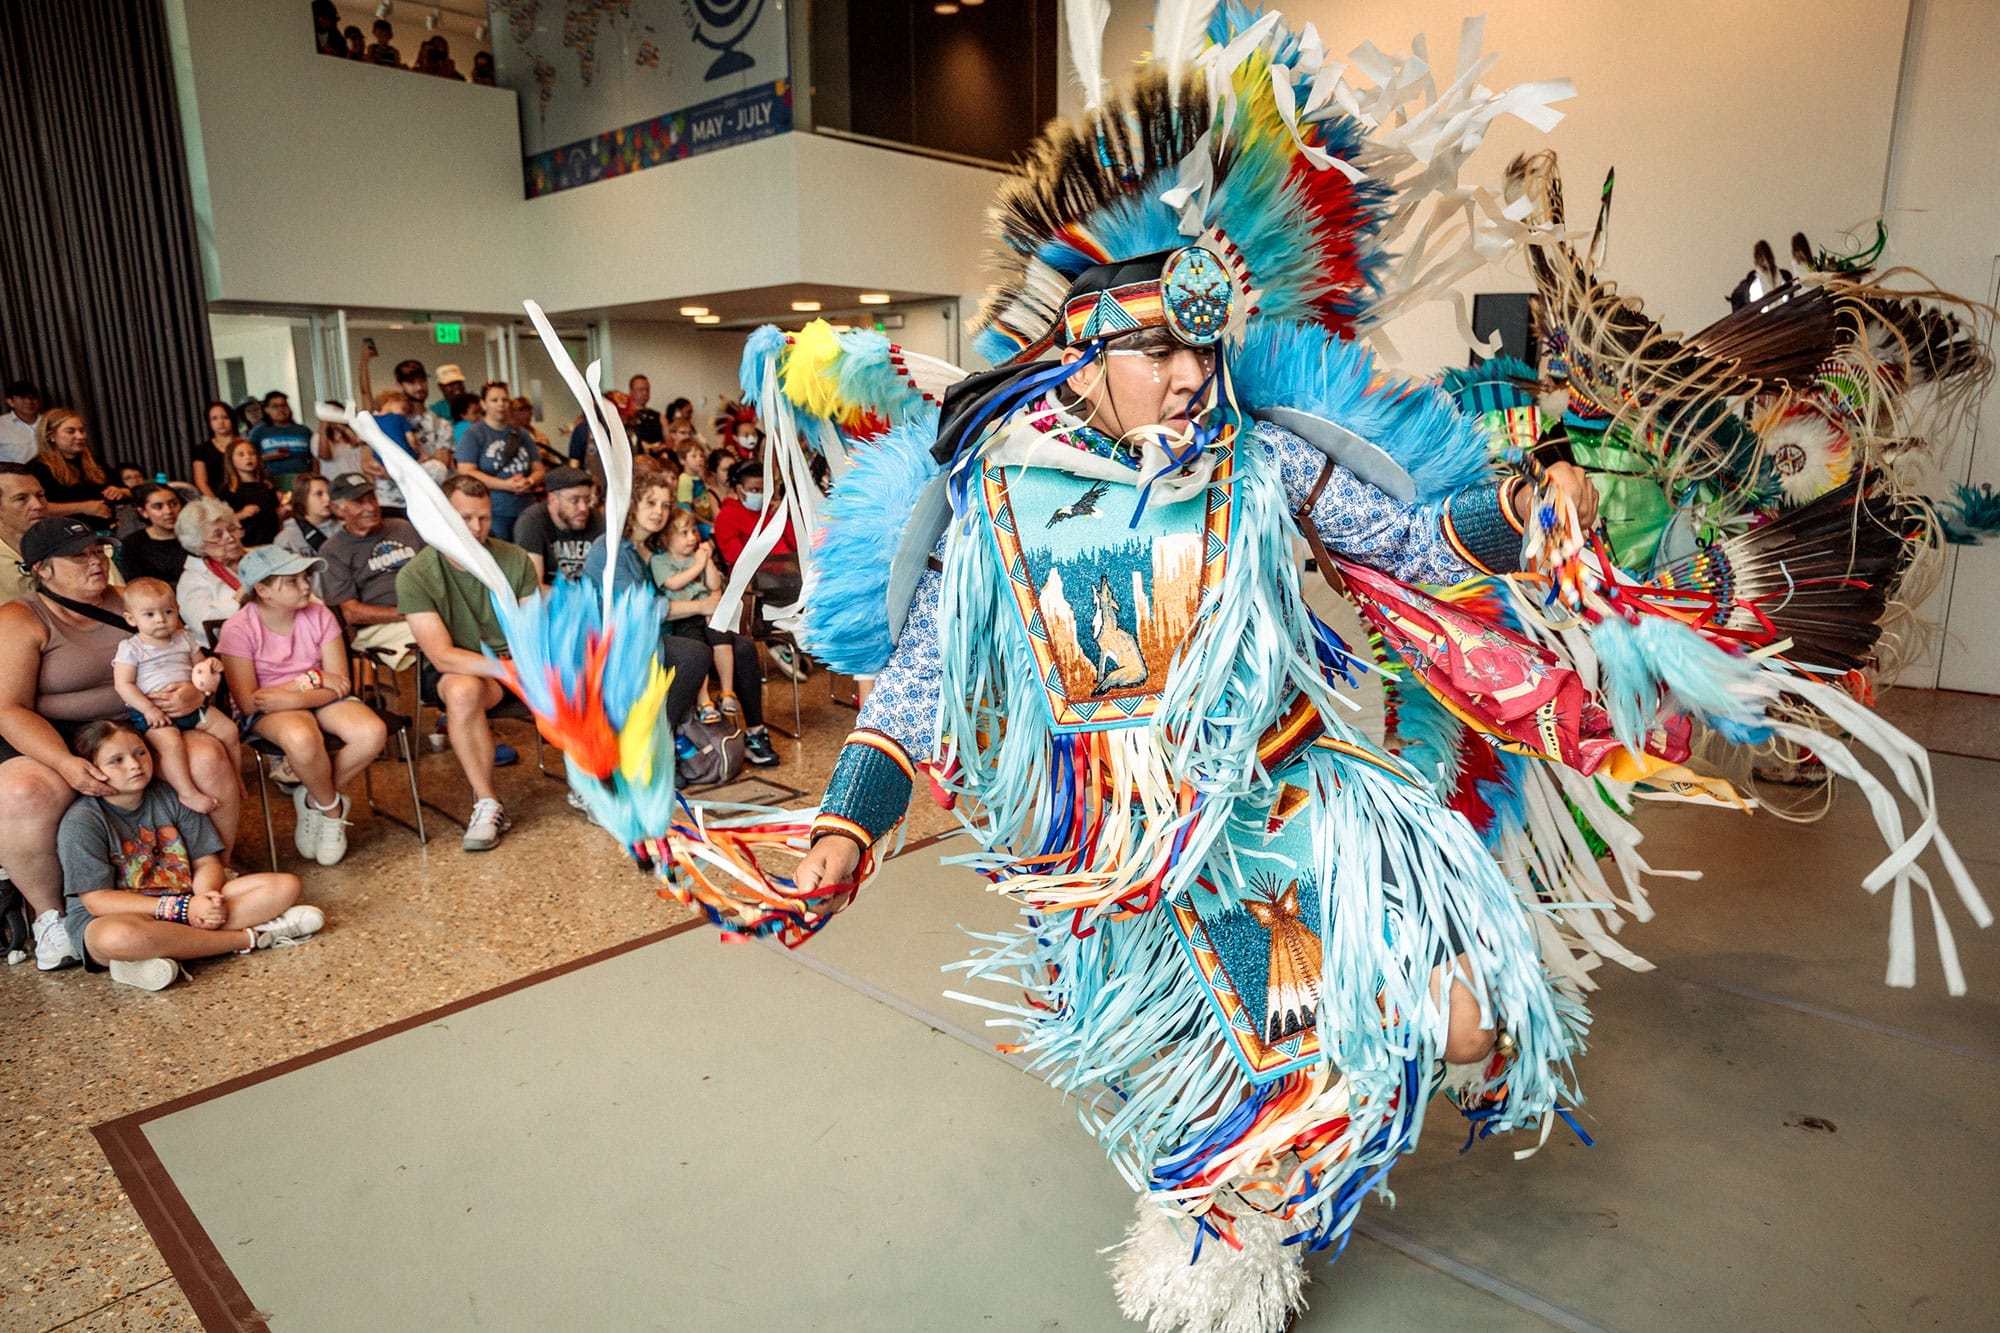 Tulsa’s weekly Global Gatherings, which drew nearly 4,500 people, highlighted traditions from around the country and the world, including Native American dress and dancing in order to immerse community members in the many rich cultures present throughout the city. Photo: Courtesy of Gathering Place